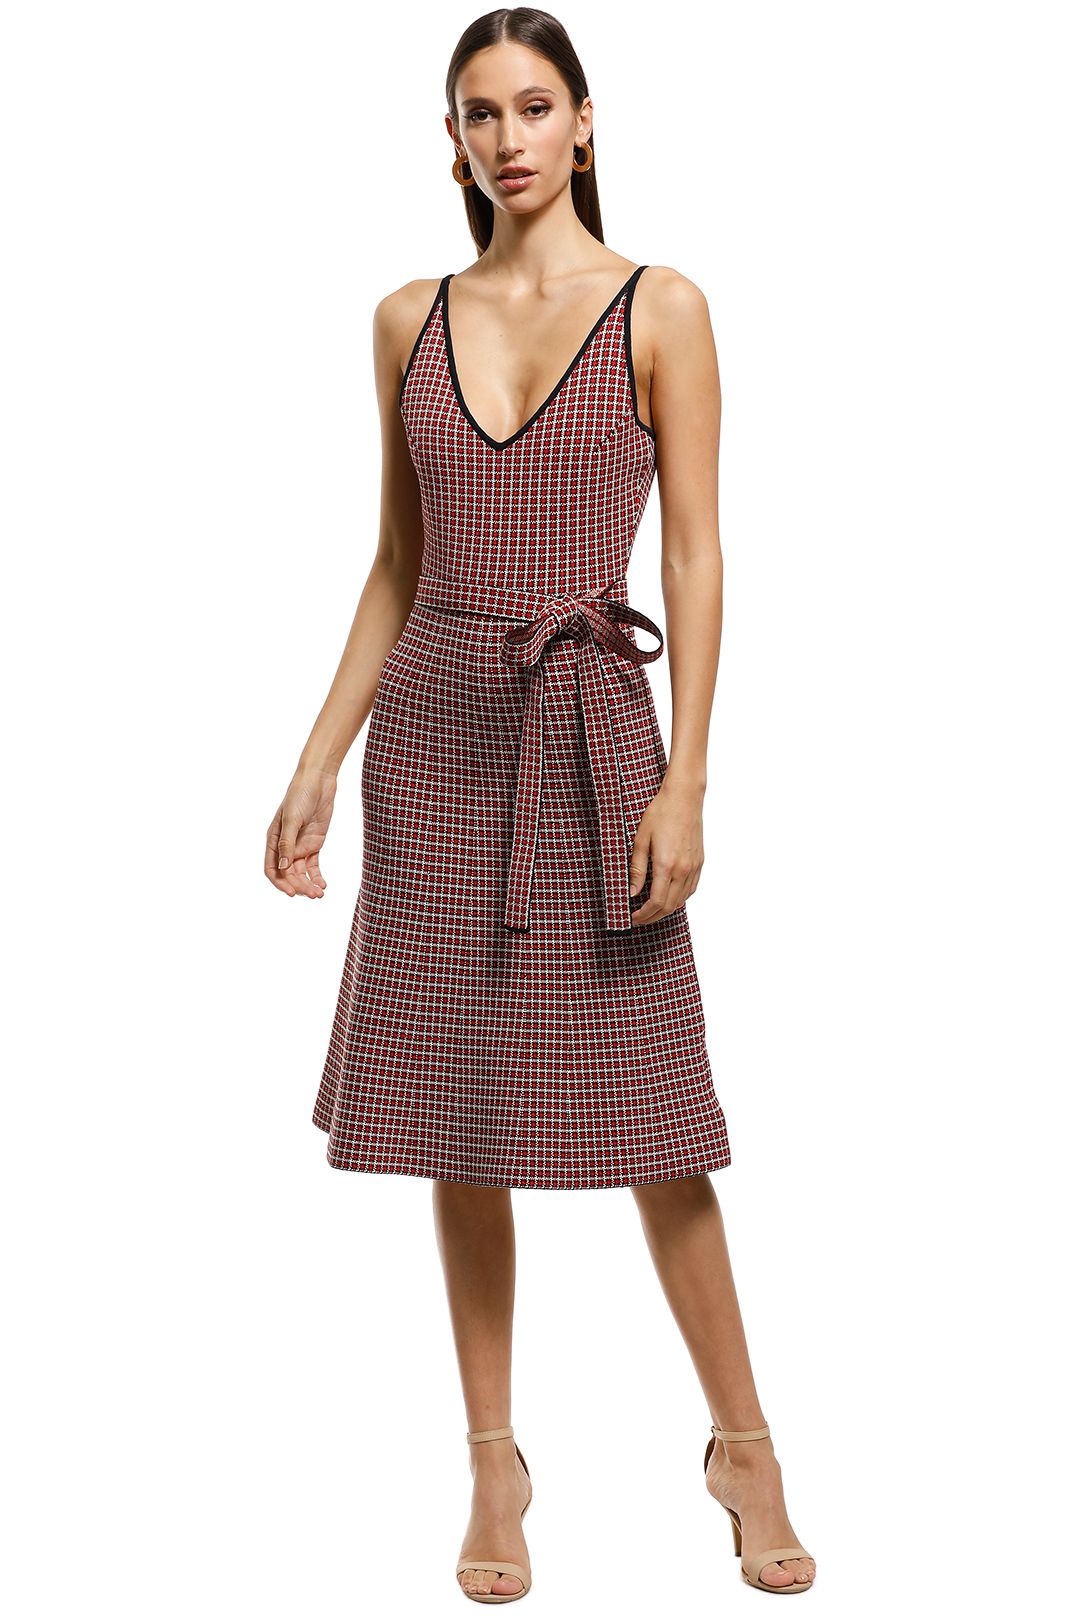 Crepe Knit Plaid Dress by Scanlan Theodore for Hire